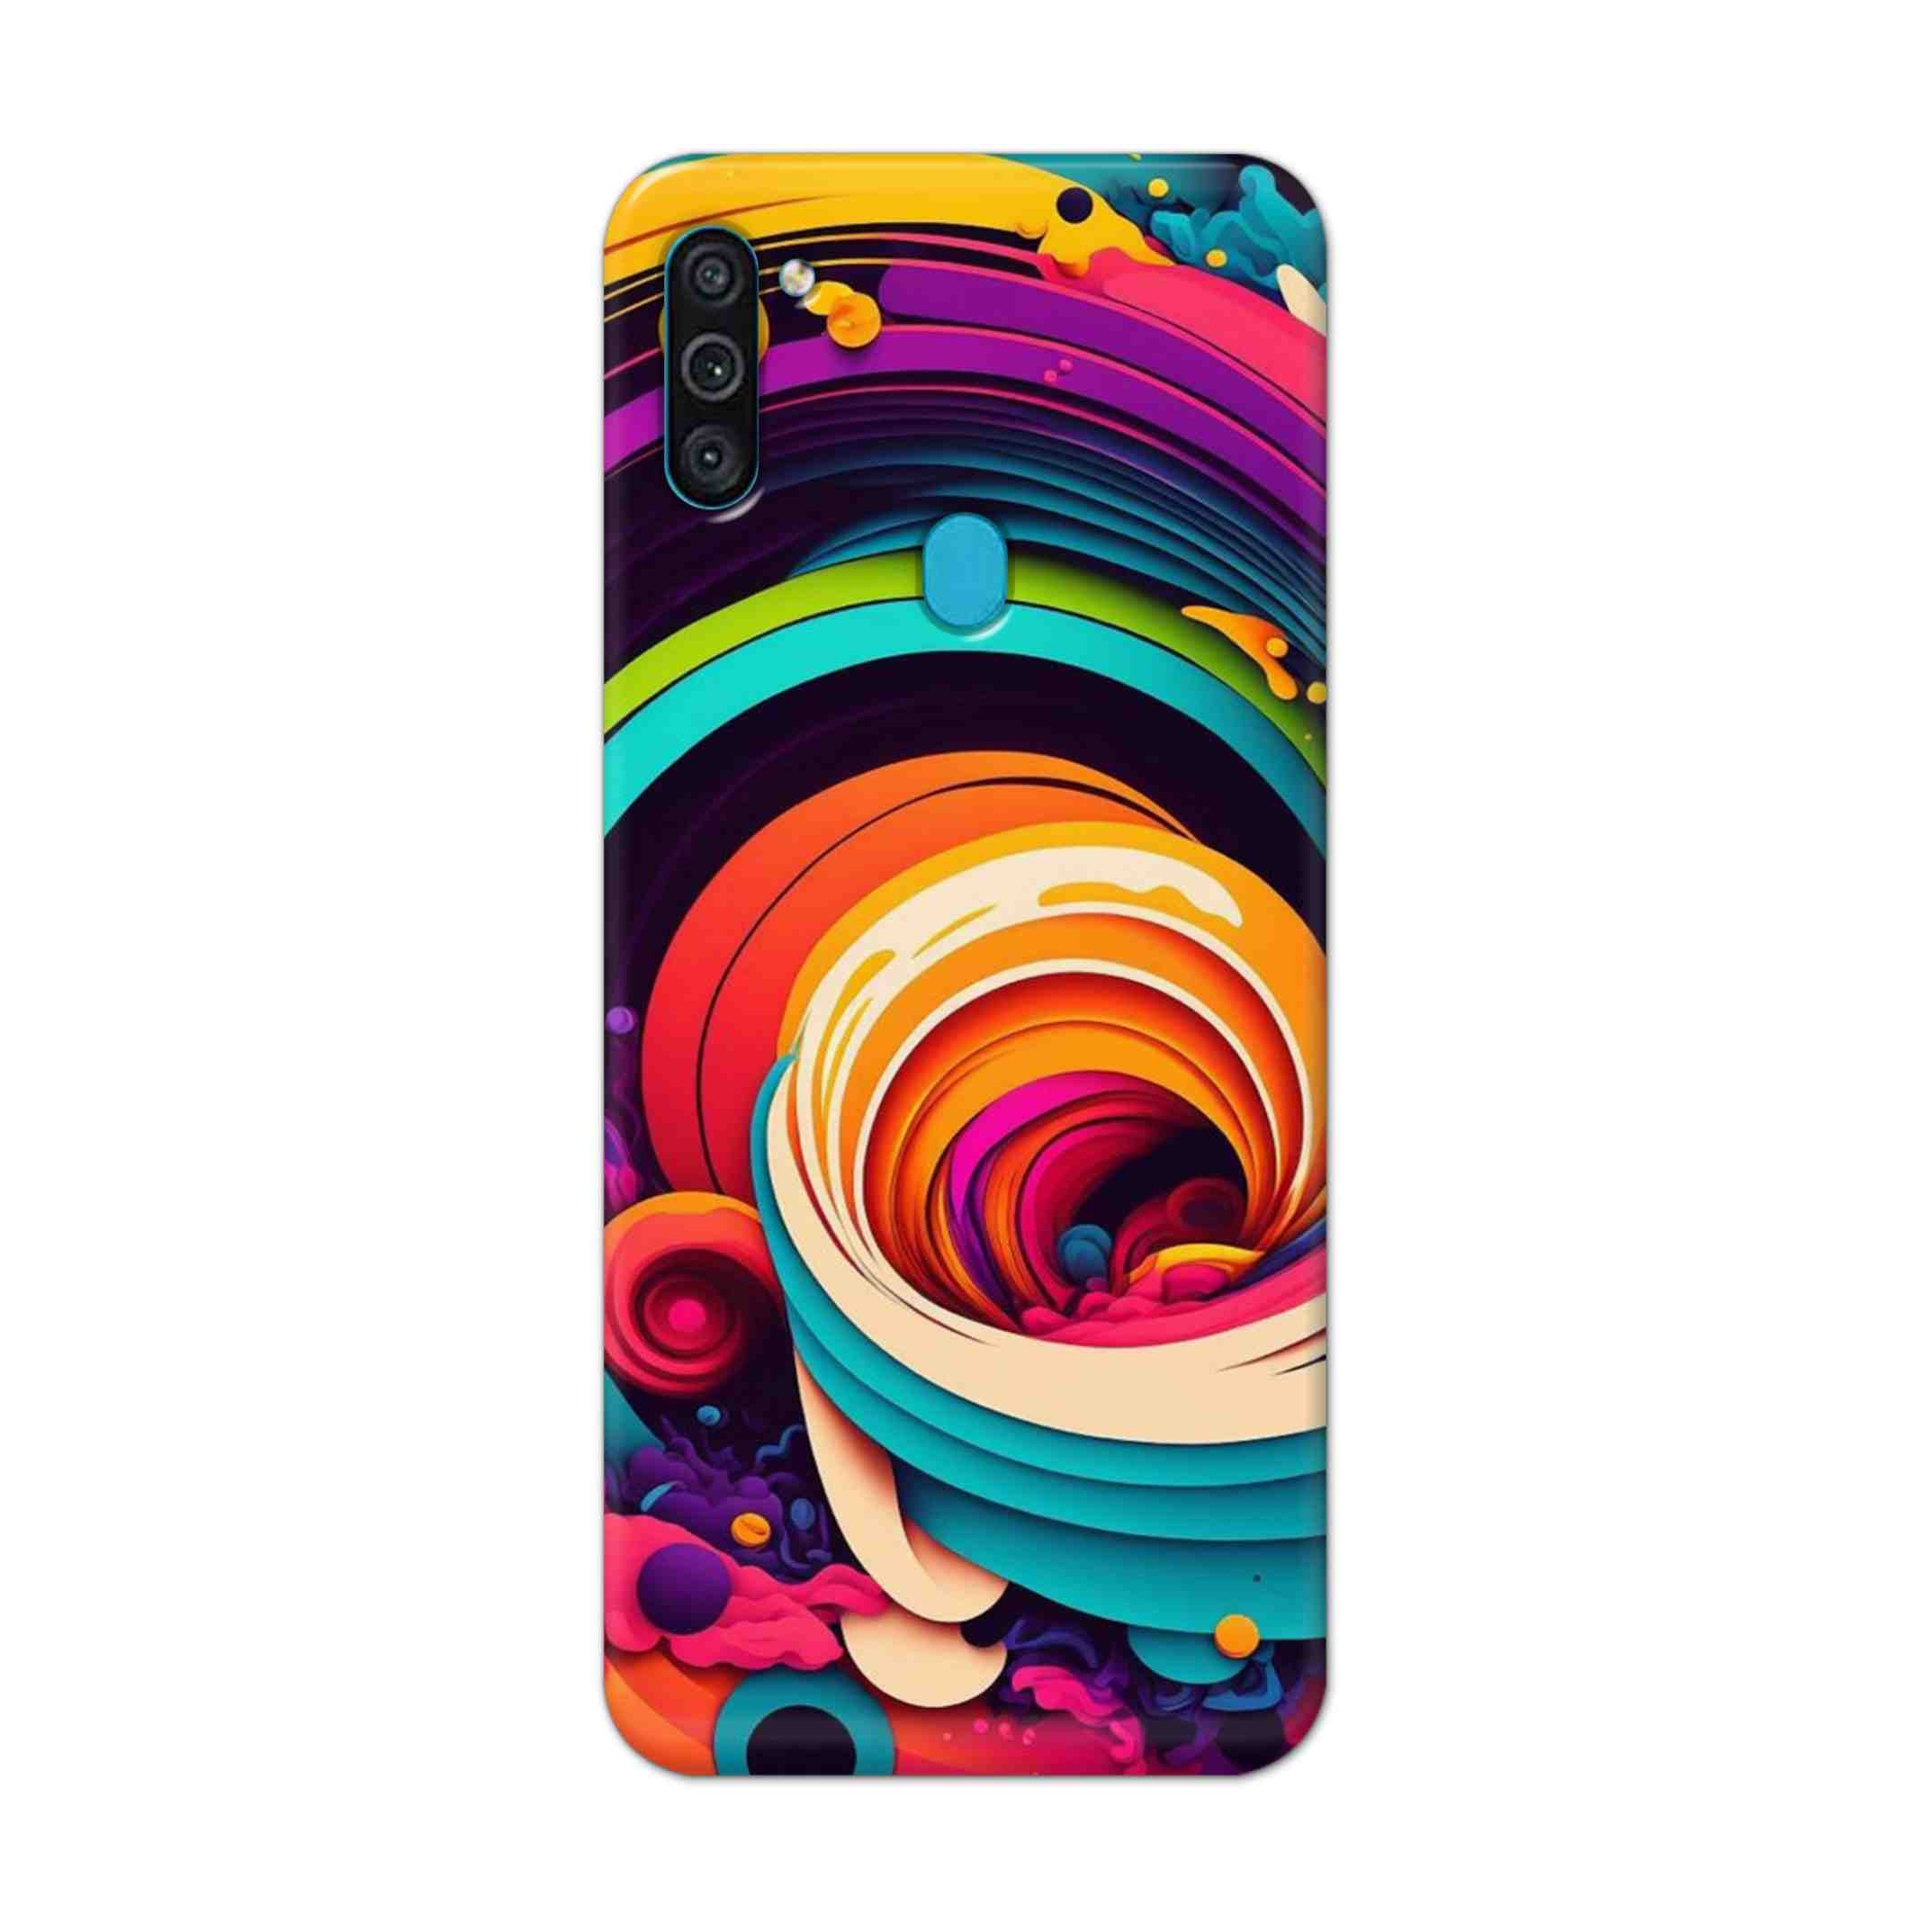 Buy Colour Circle Hard Back Mobile Phone Case Cover For Samsung Galaxy M11 Online